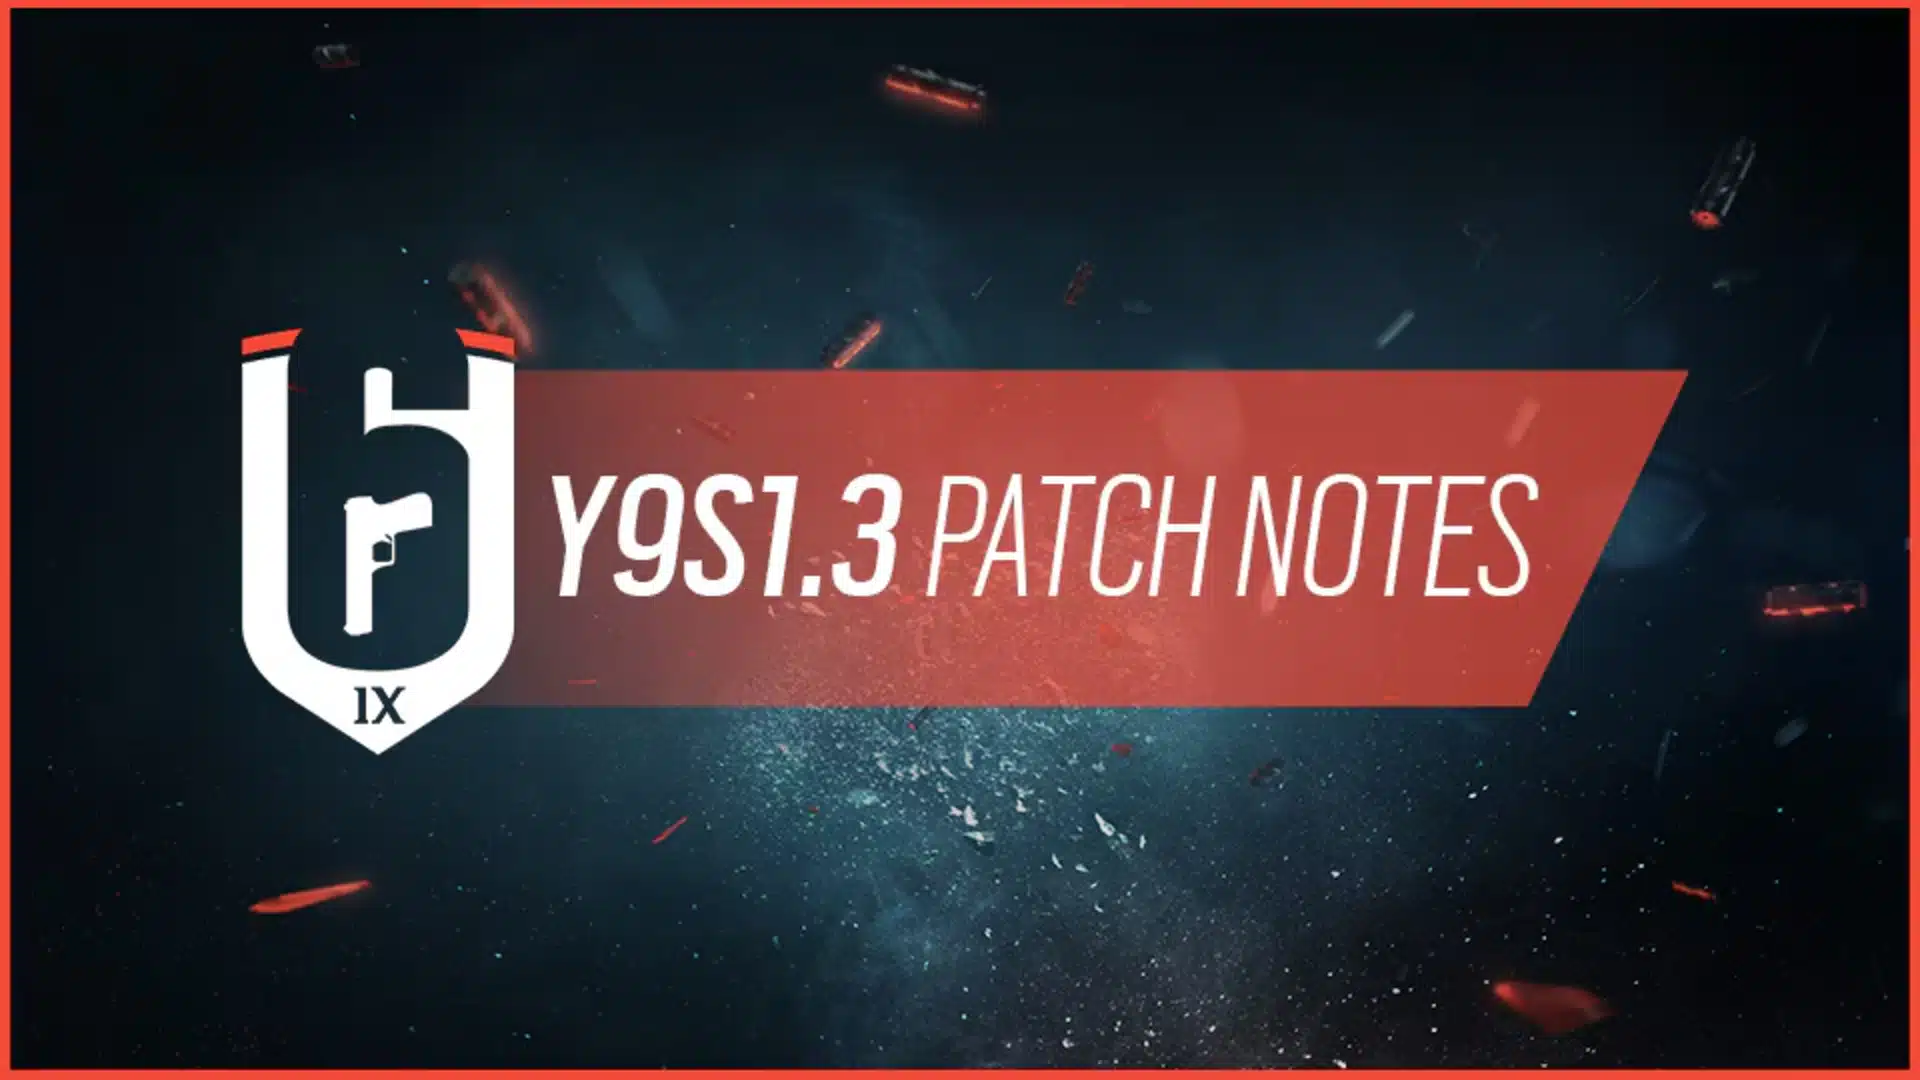 R6 Siege Update 1.000.078 Pushed Out for Y9S3.1 This May 2